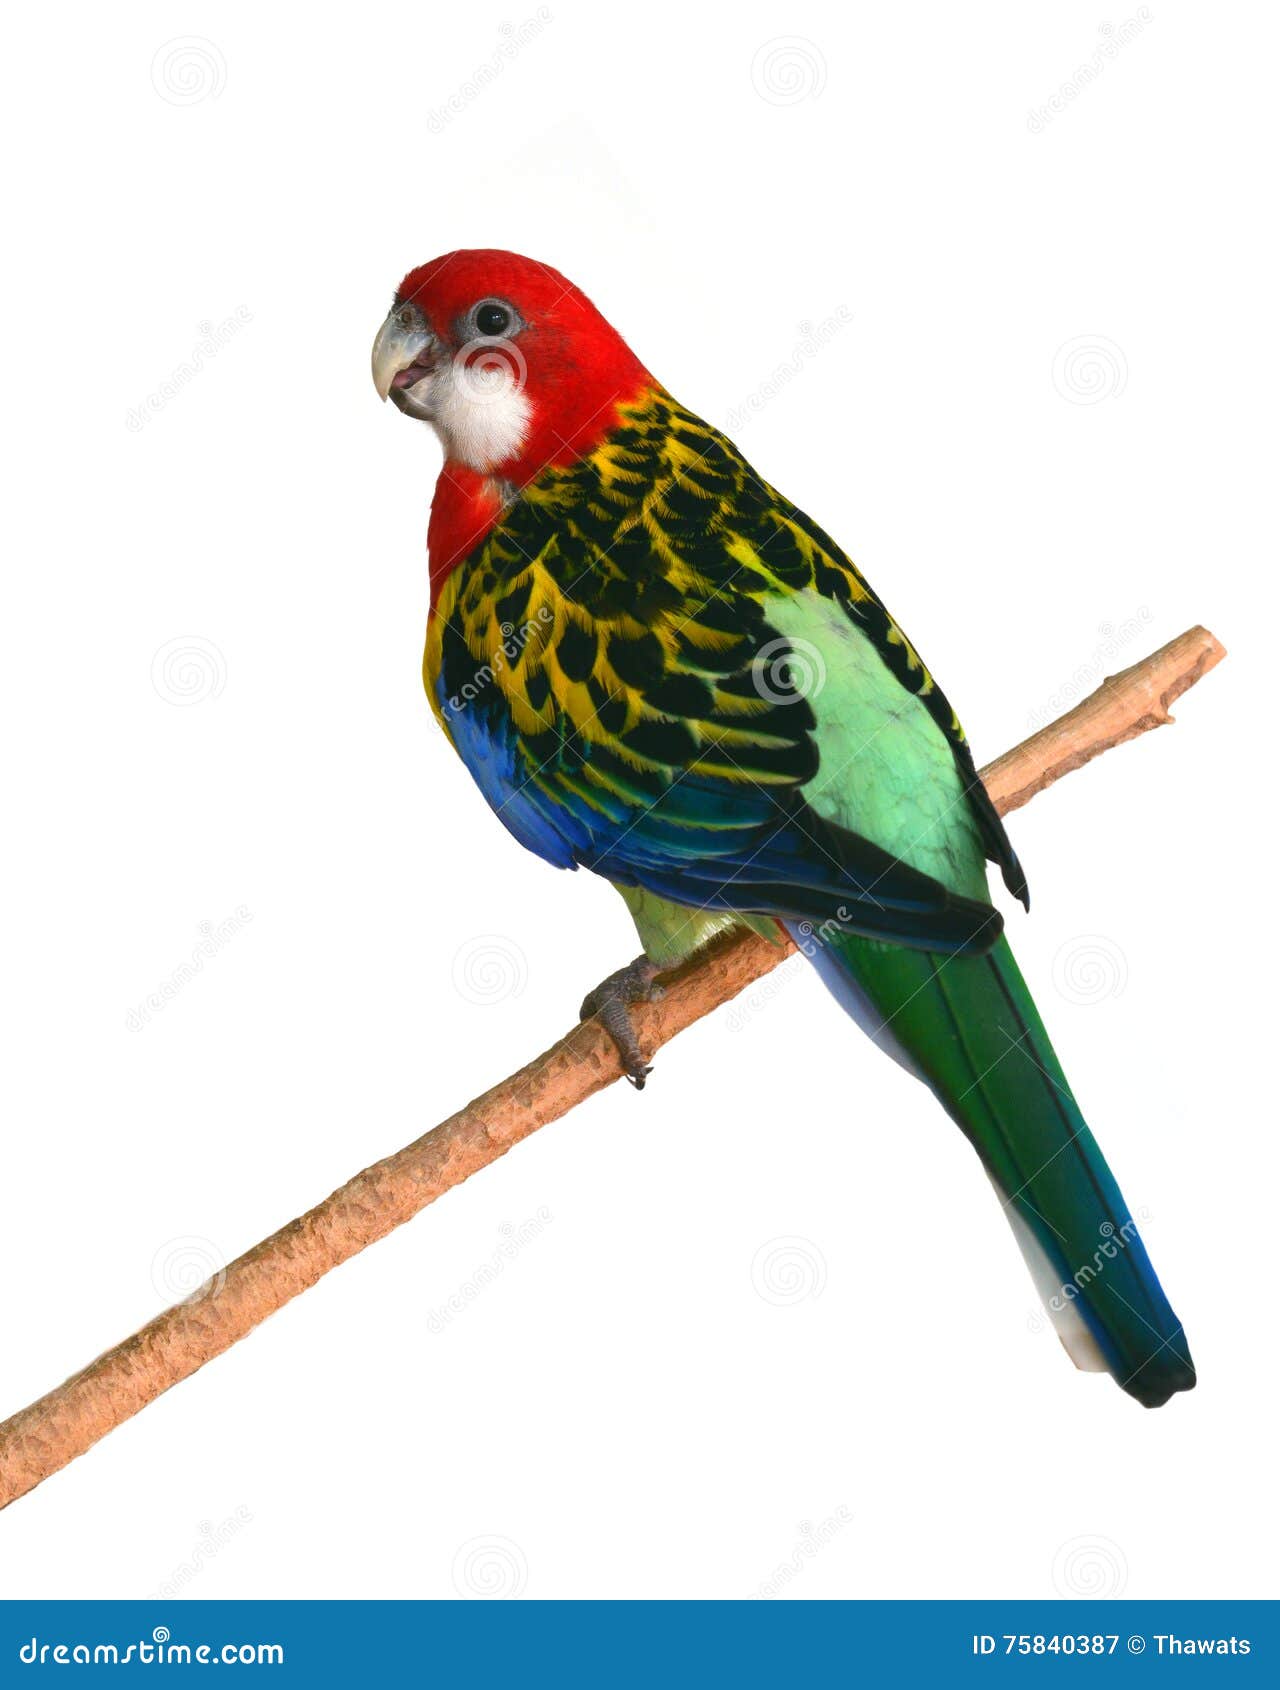 Eastern Rosella Parrot bird. Beautiful colorful bird, Eastern Rosella Parrot (Platycercus eximius) perching on a branch on white background.